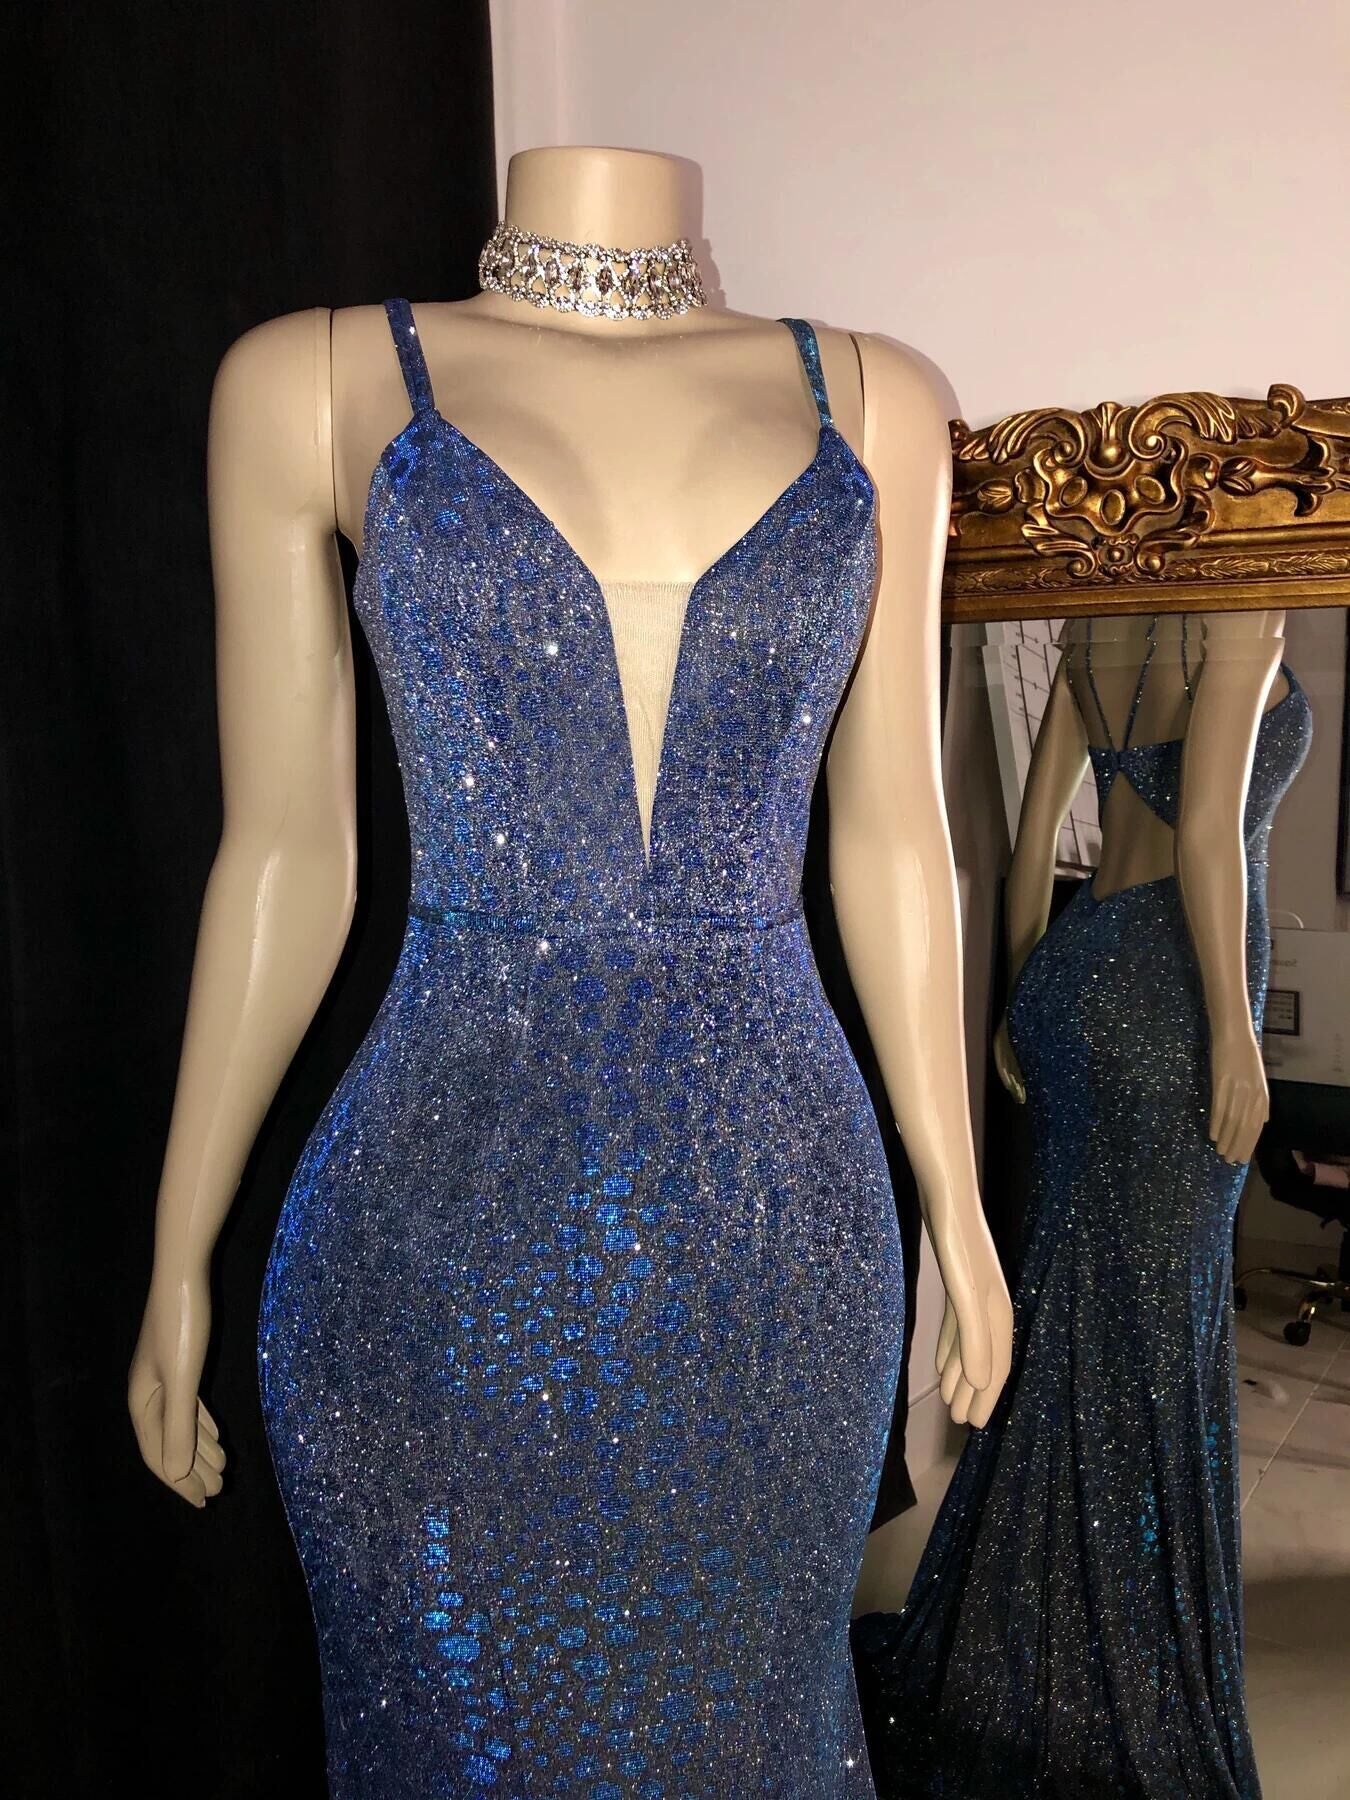 Glitter Mermaid Prom Dresses Long Spaghetti Straps V Neck Open Back Formal Evening Party Gowns SA1672